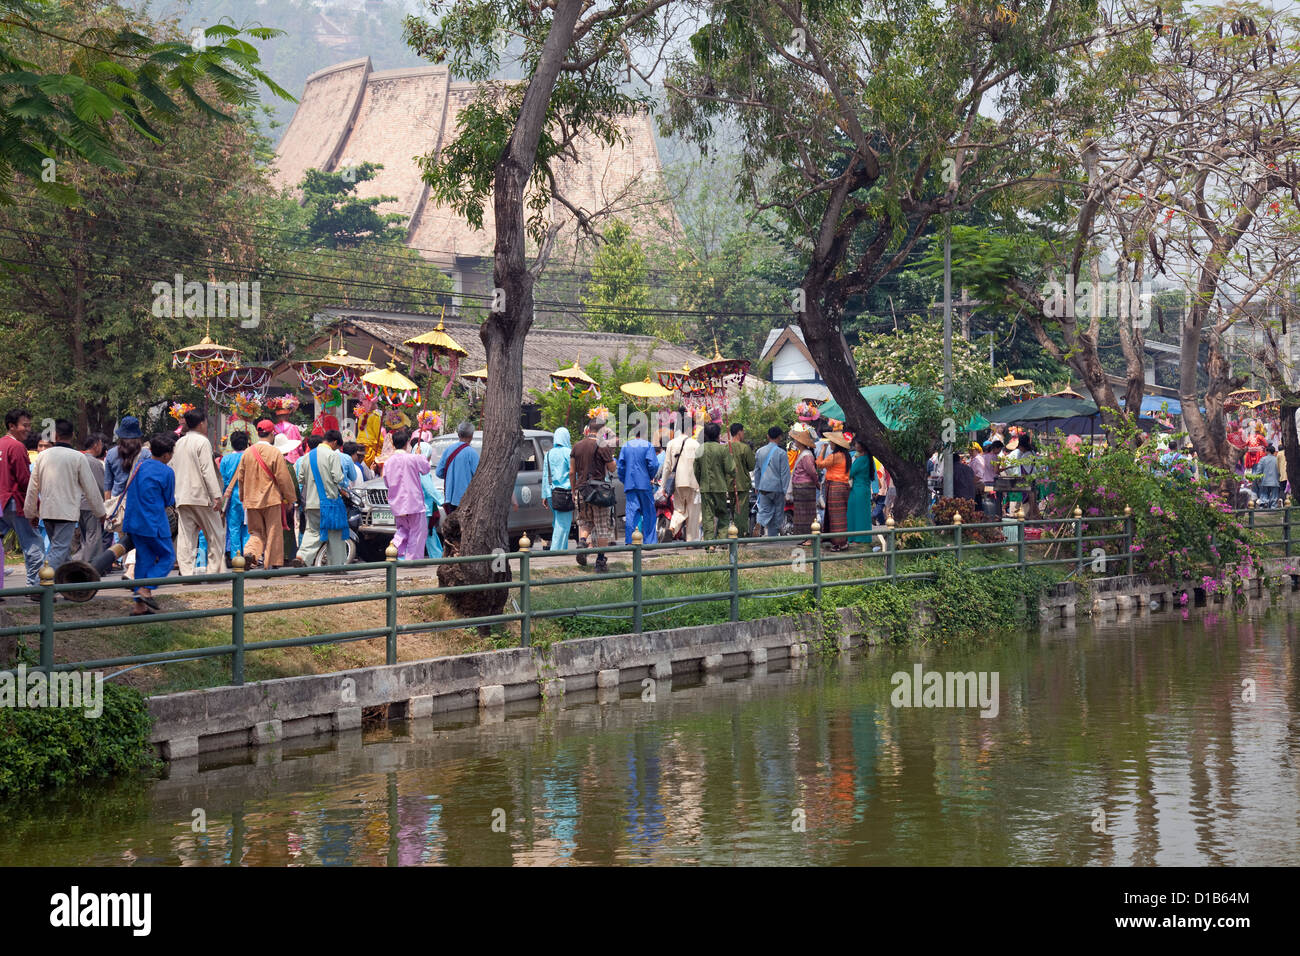 Procession of people at 'Poy Sang Long' festival where young monks are ordained, Mae Hong Son, Thailand Stock Photo